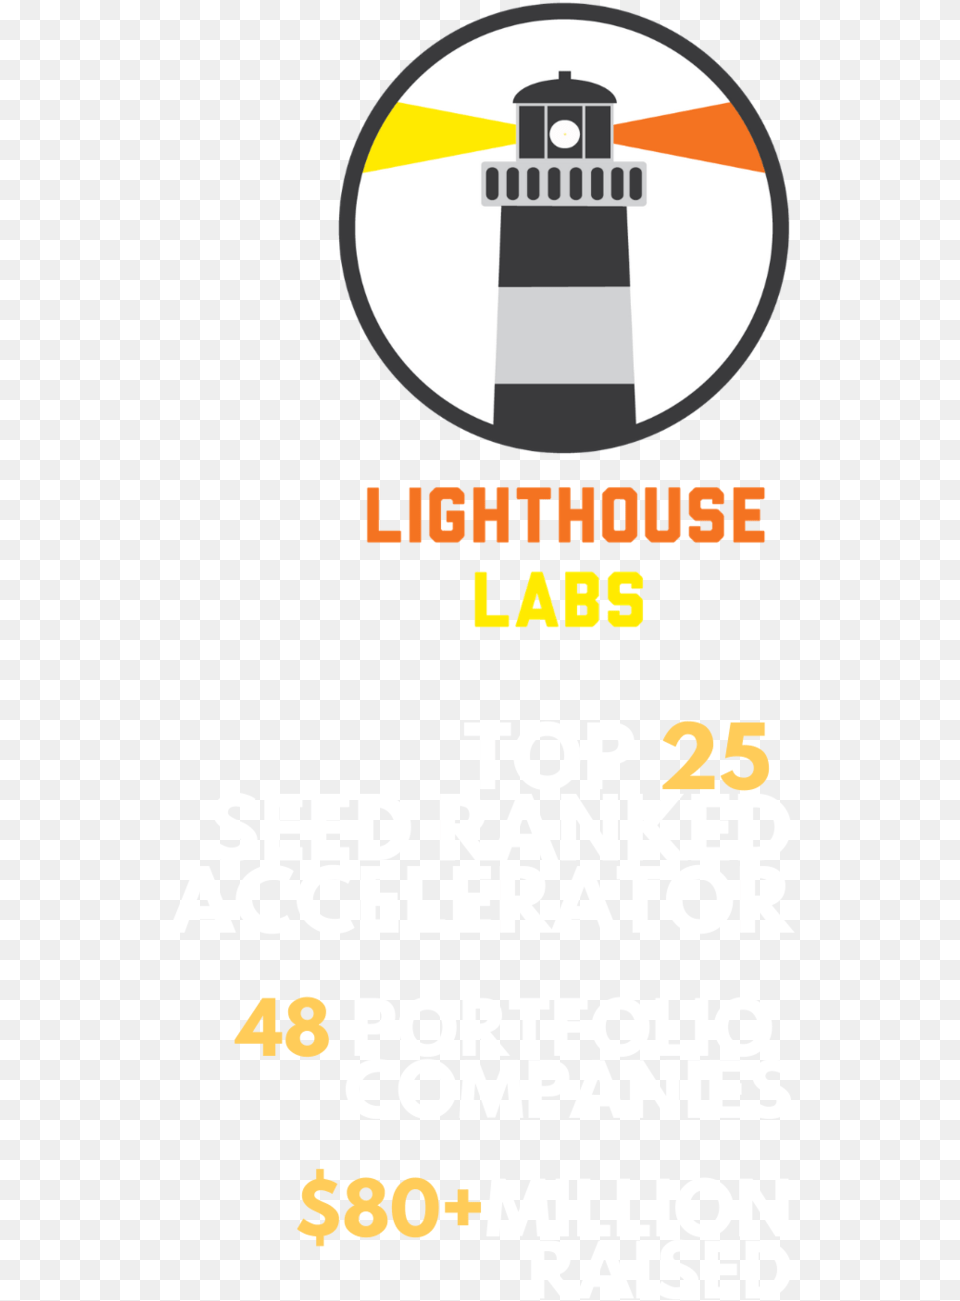 Always Stay Hydrated Lighthouse Labs, Advertisement, Poster, Scoreboard Png Image